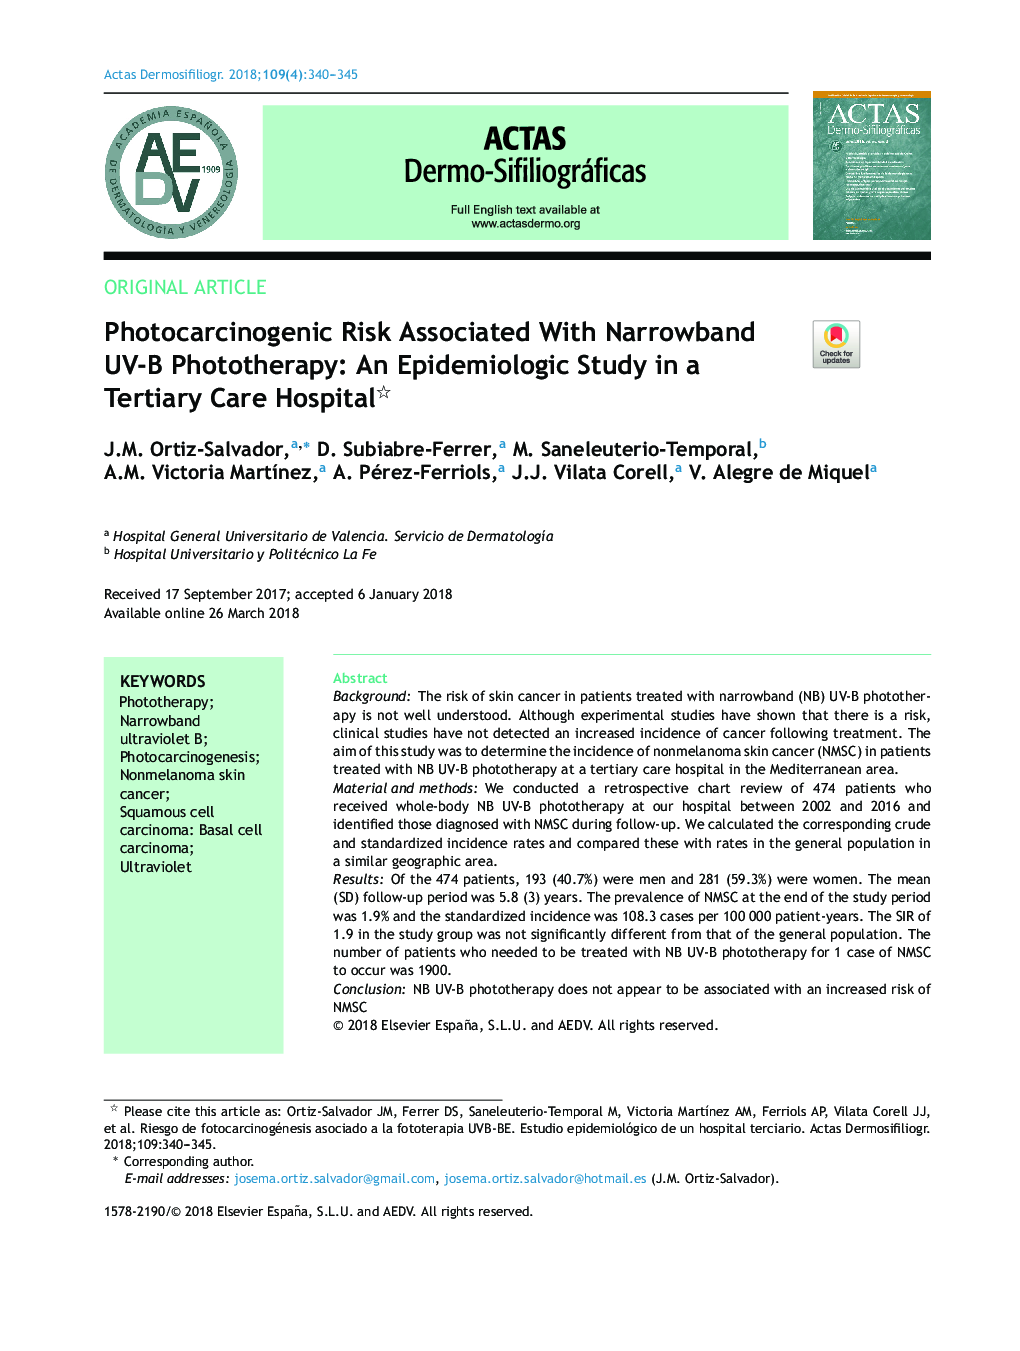 Photocarcinogenic Risk Associated With Narrowband UV-B Phototherapy: An Epidemiologic Study in a Tertiary Care Hospital